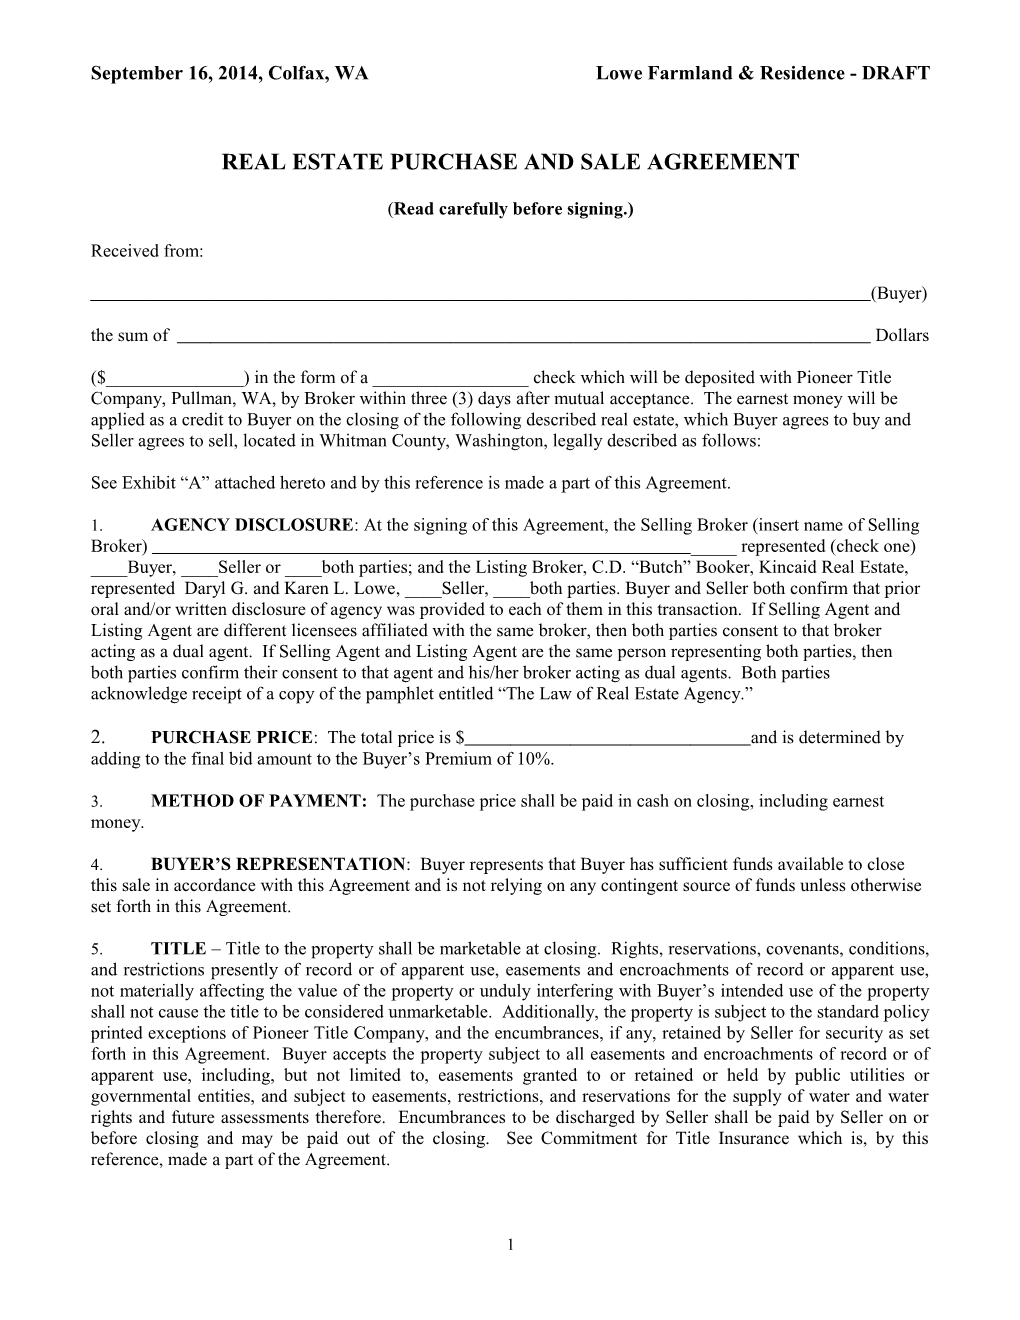 Real Estate Purchase and Sale Agreement